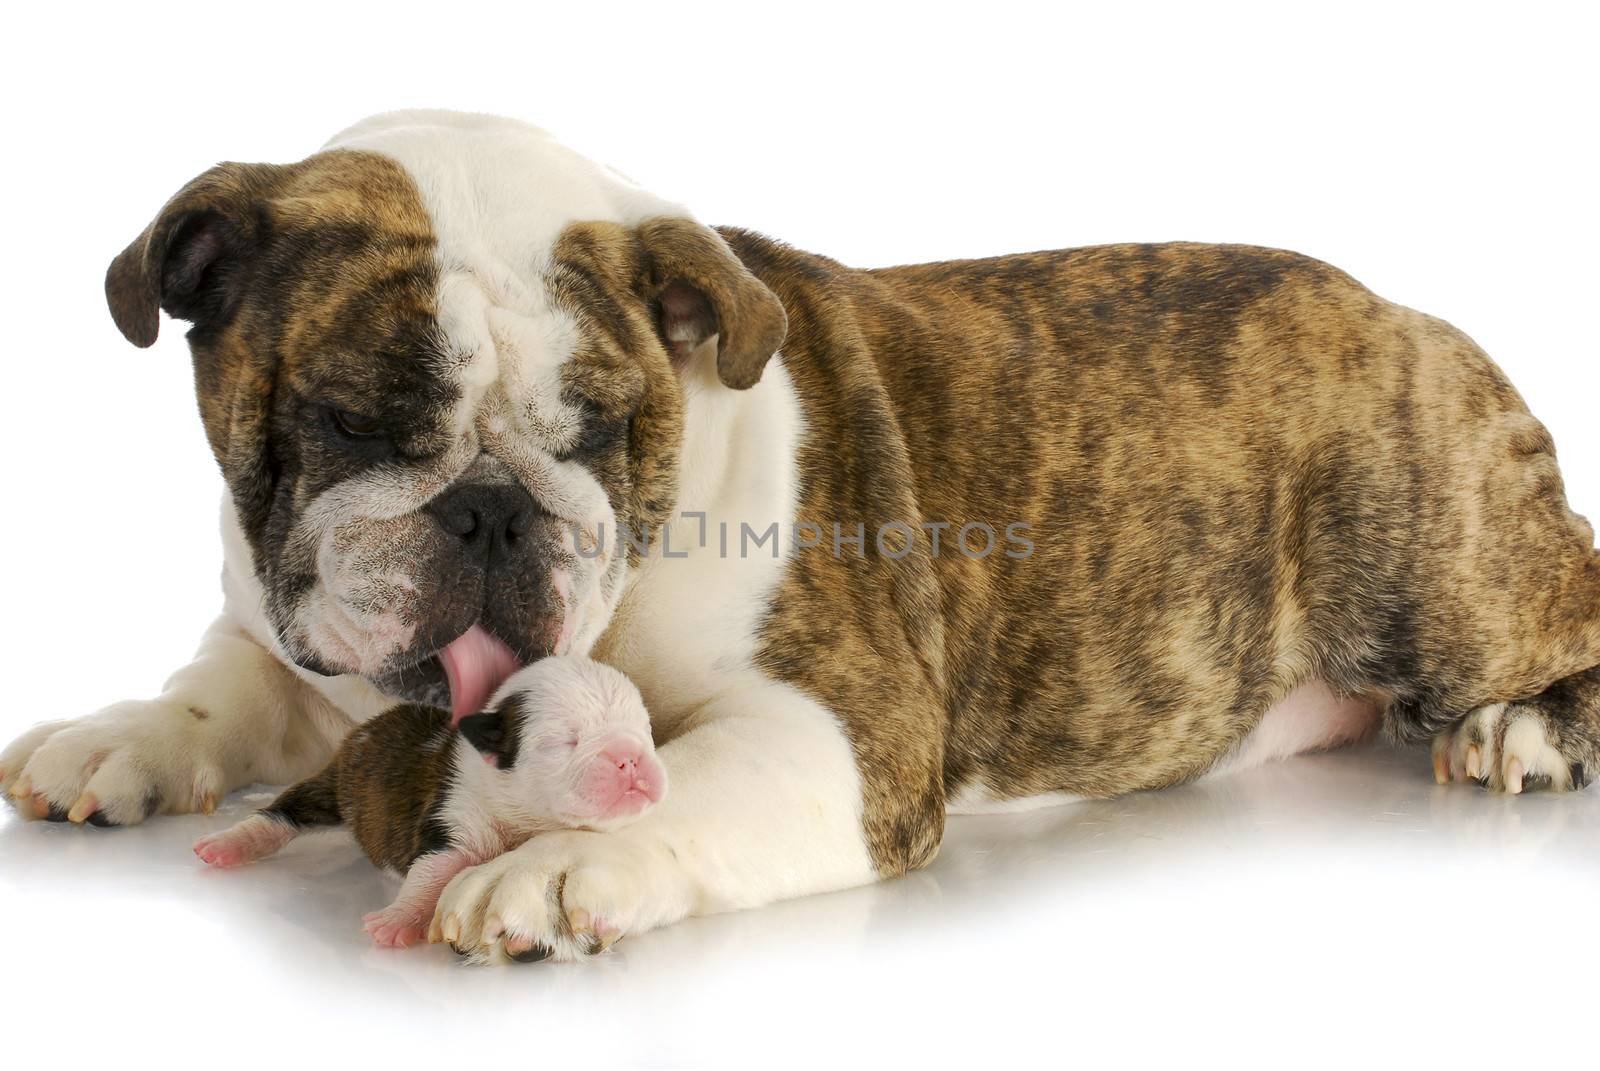 bulldog mother and puppy by willeecole123